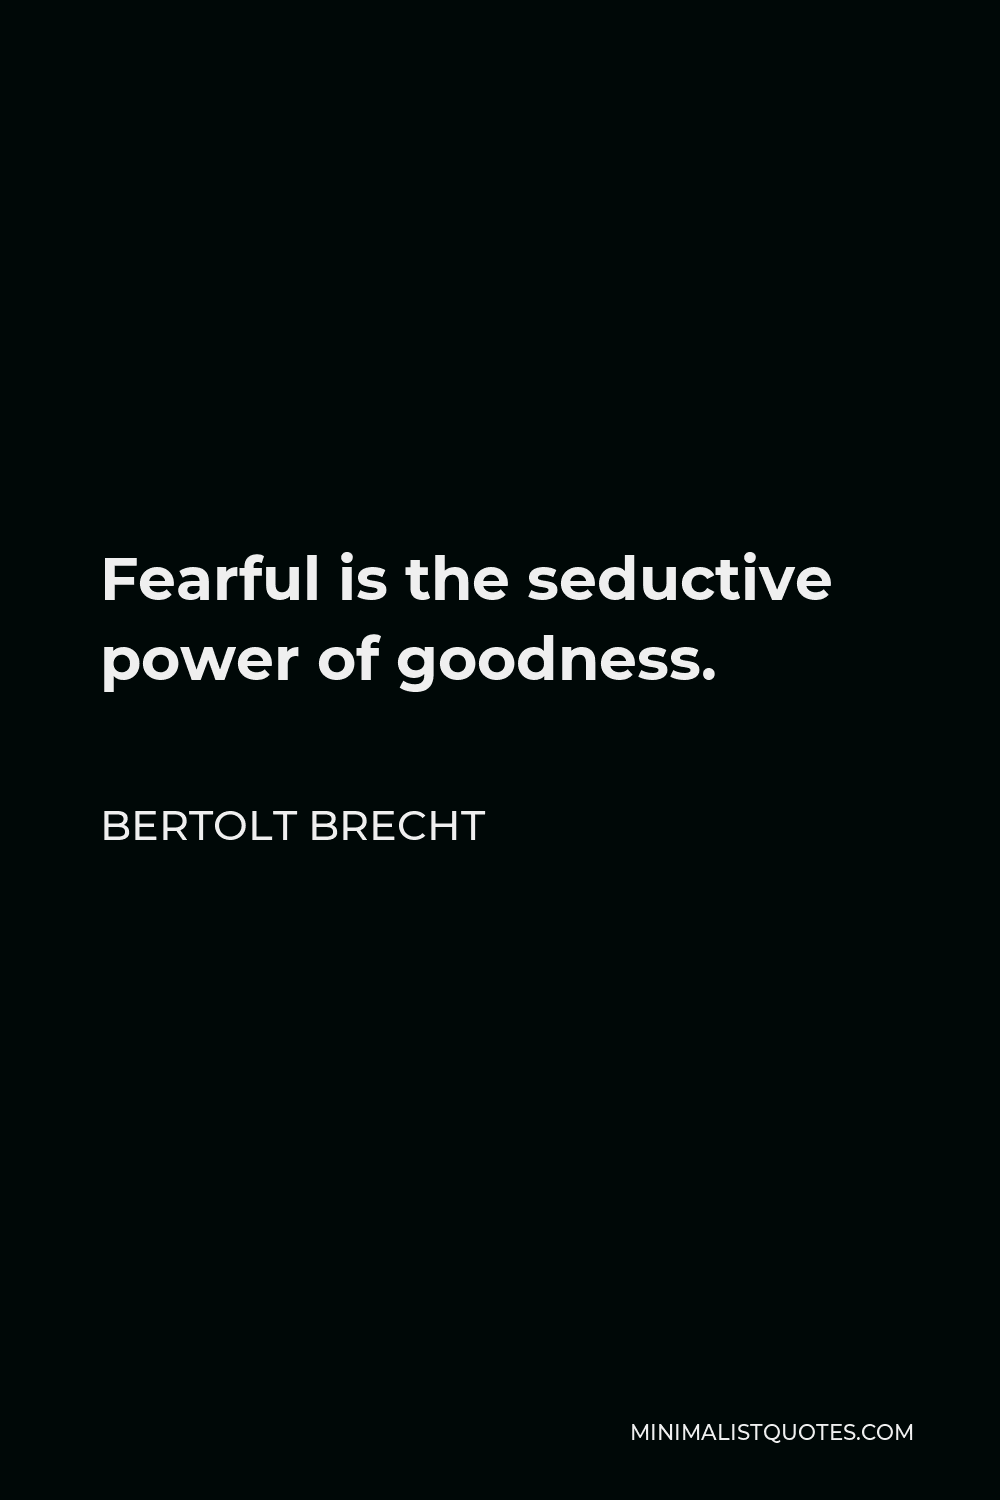 Bertolt Brecht Quote - Fearful is the seductive power of goodness.